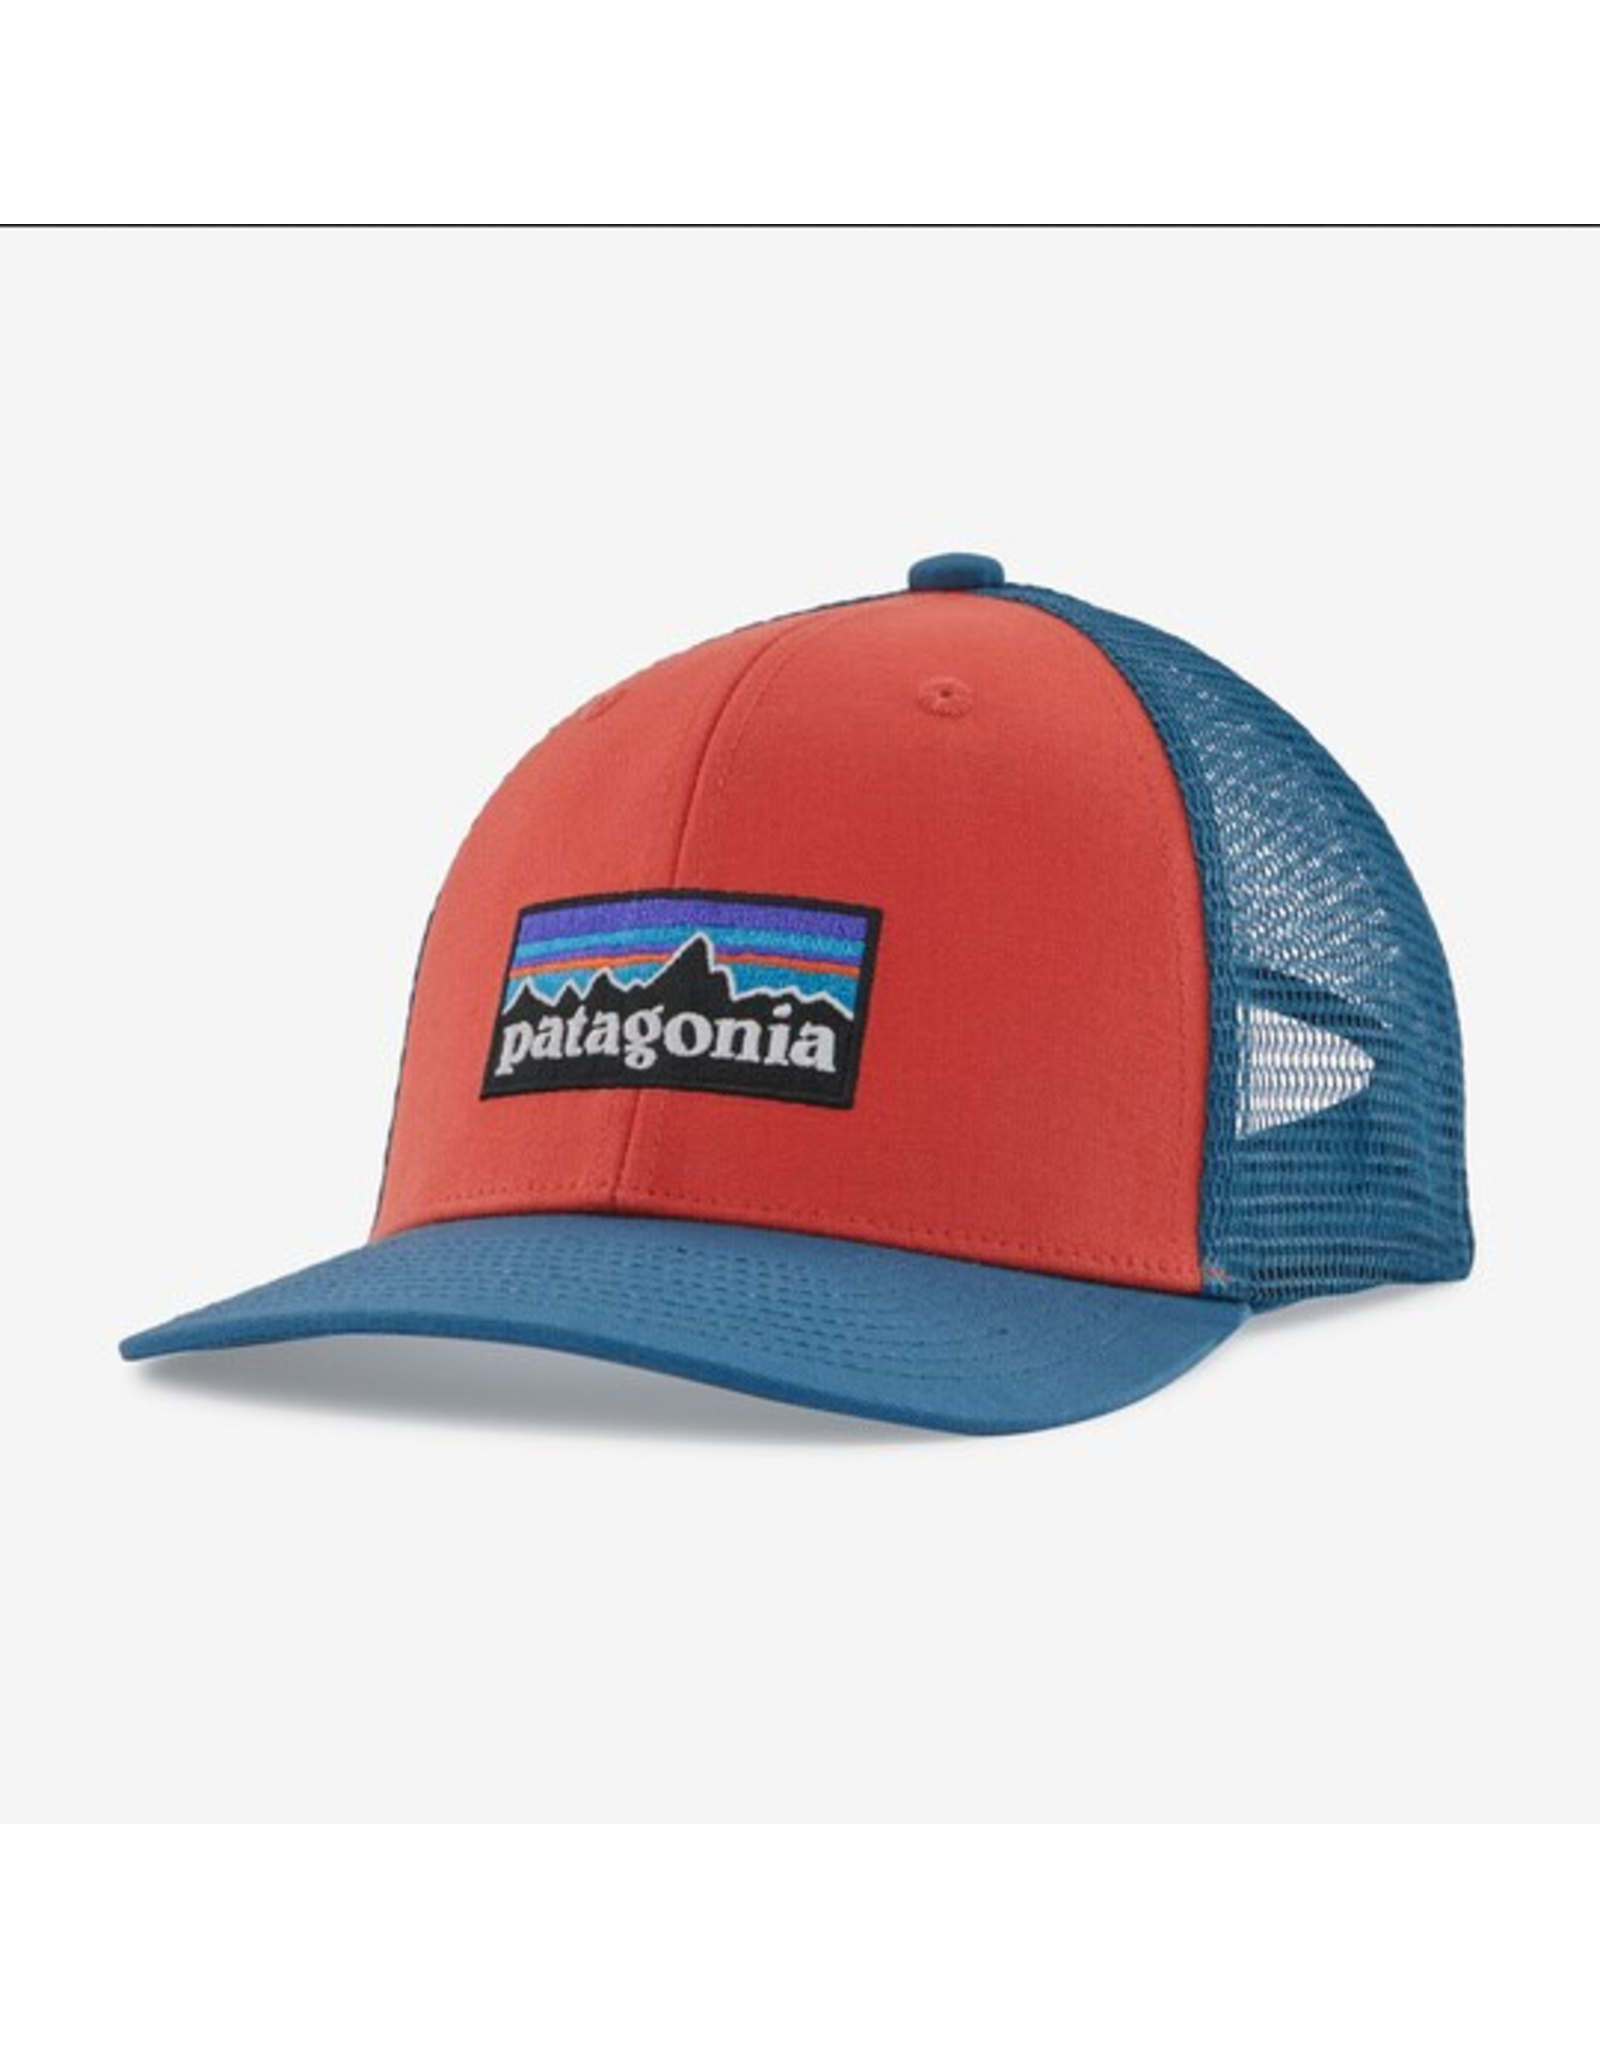 PATAGONIA YOUTH TRUCKER HAT 2023